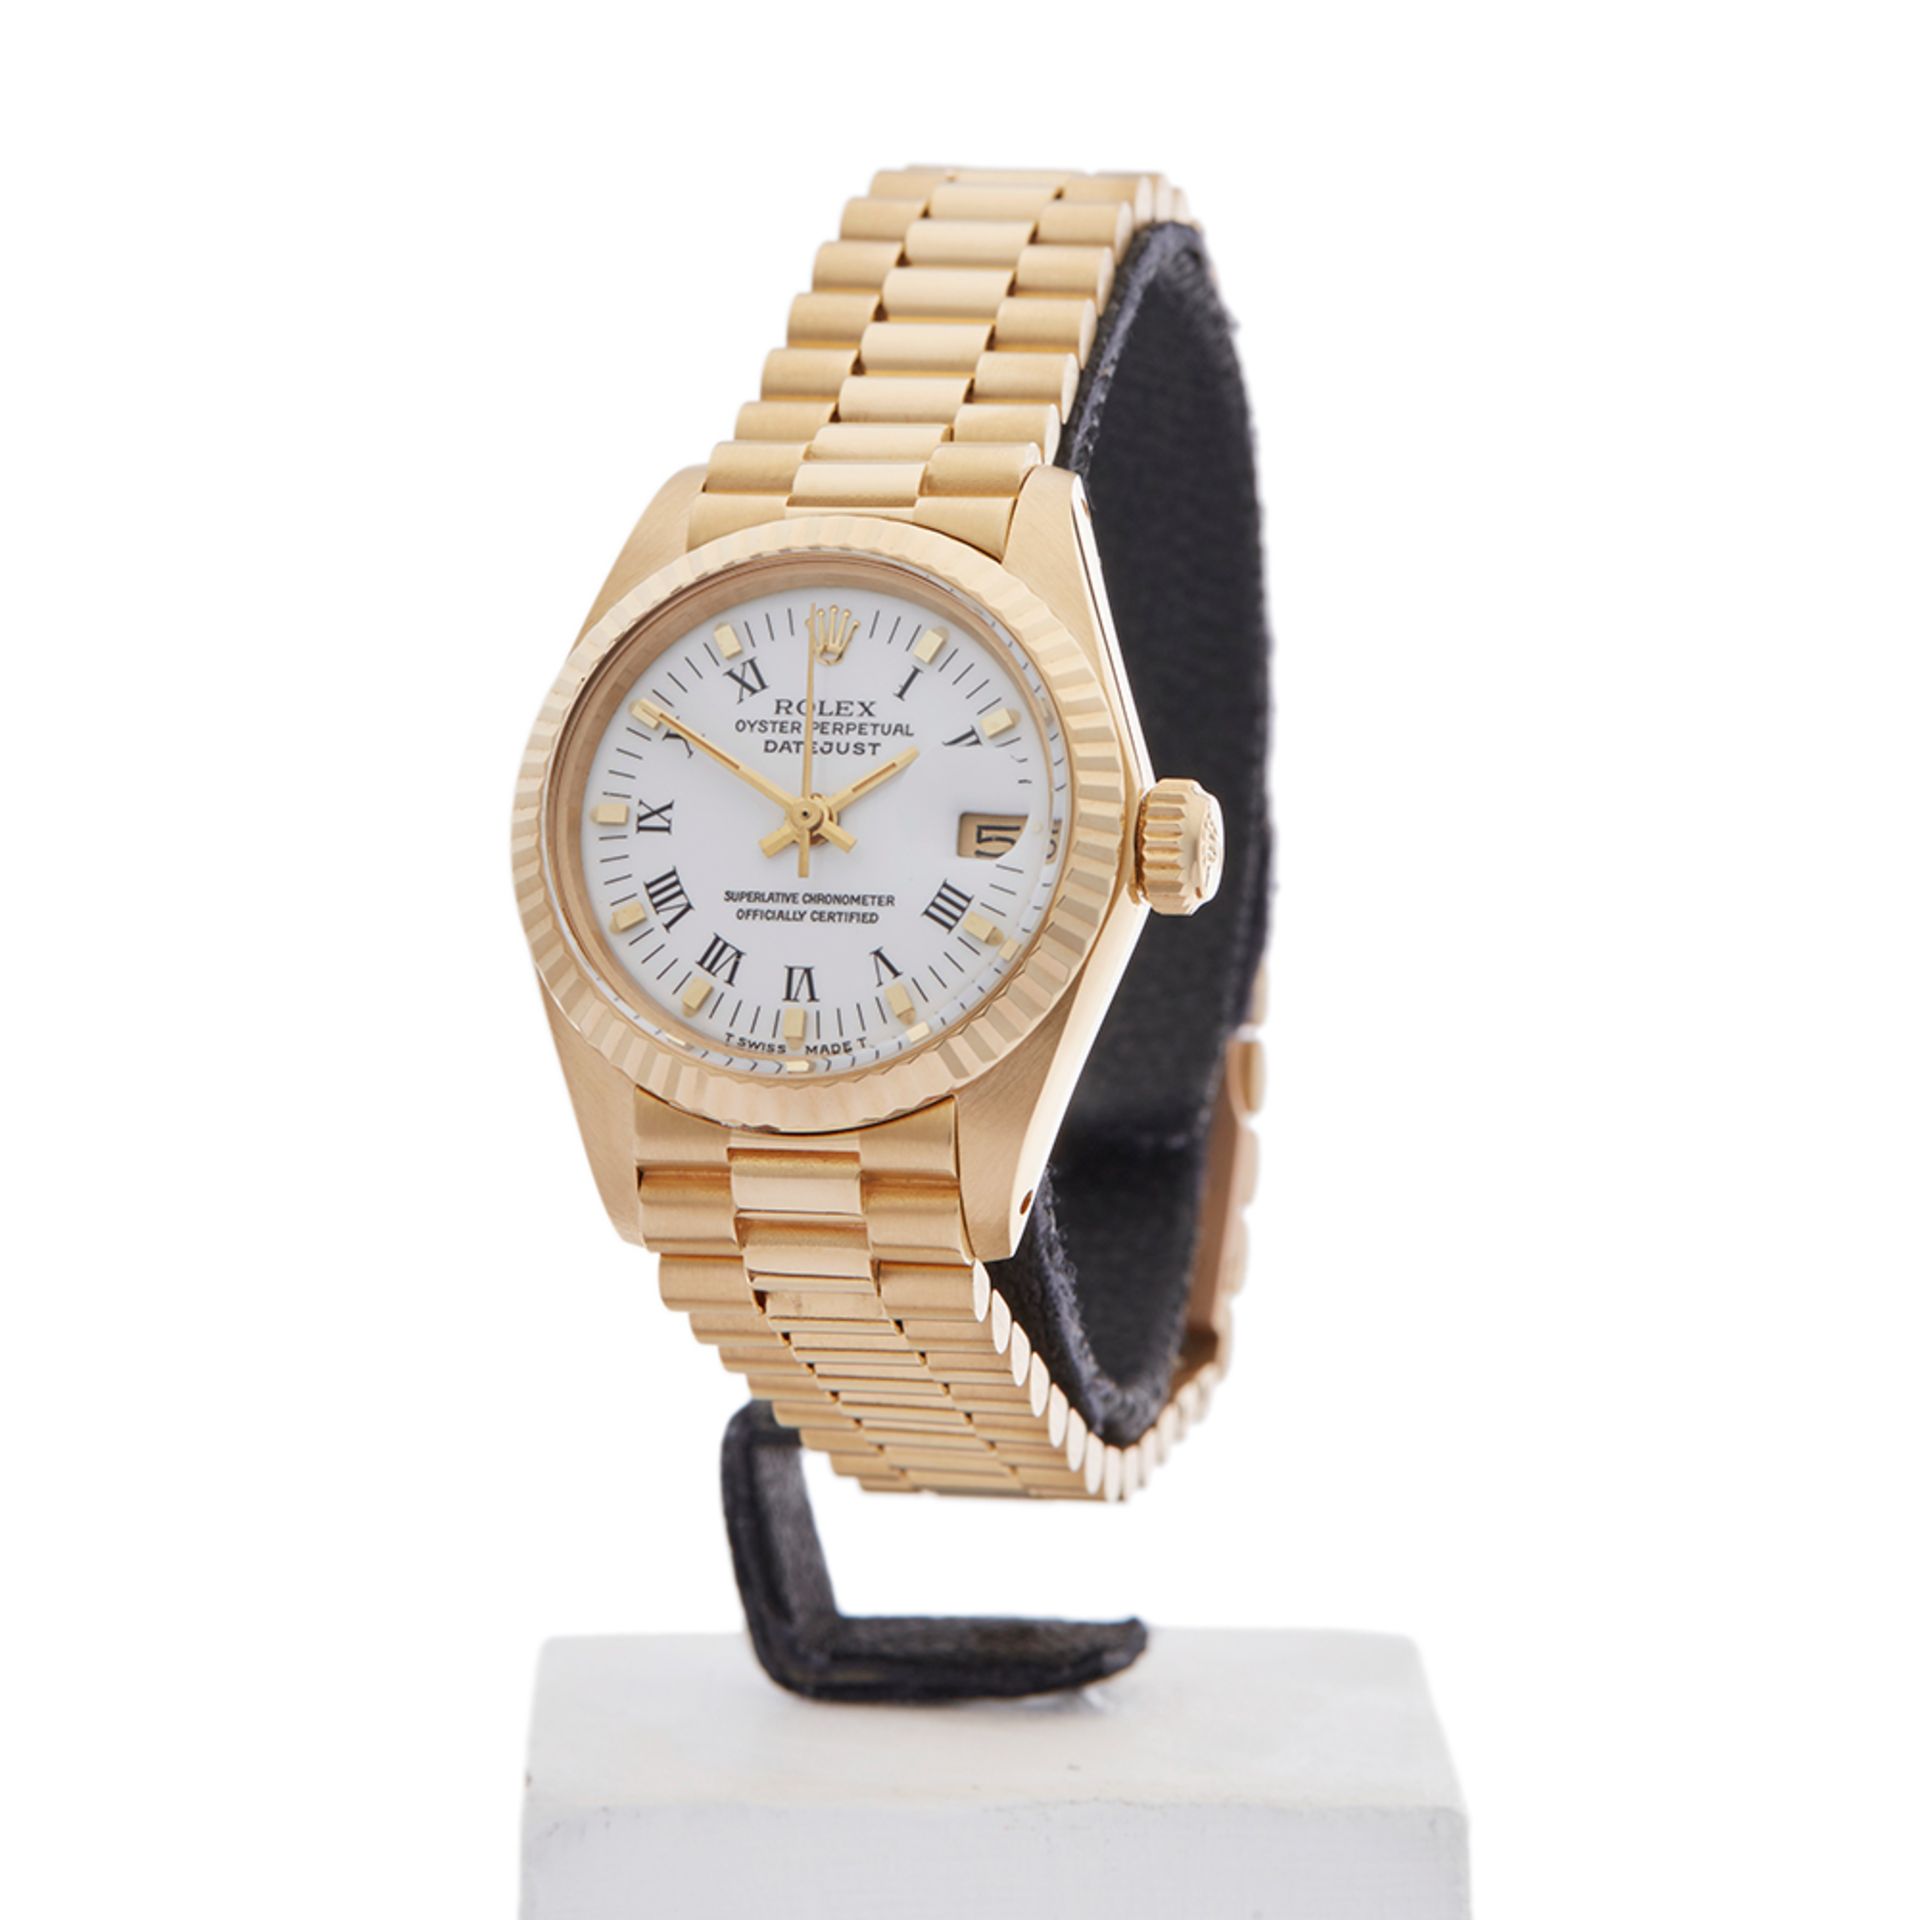 Rolex Datejust 26mm 18k Yellow Gold 6917 - Image 3 of 9